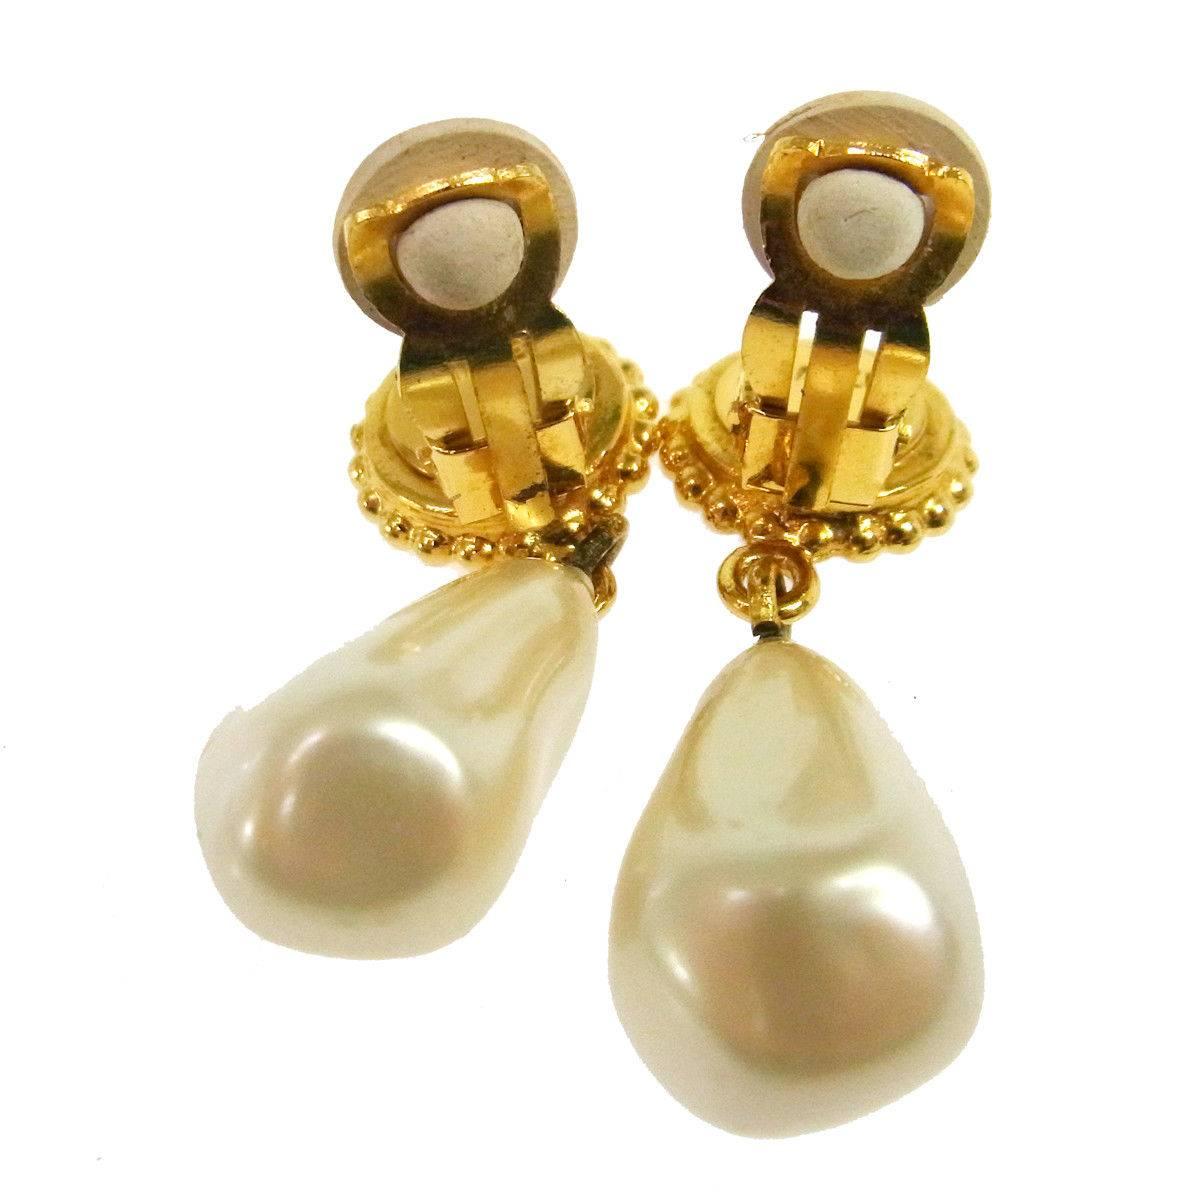 Chanel Gold Pearl Clover Charm Dangle Drop Evening Earrings in Box

Metal
Faux pearl
Gold tone hardware
Clip on closure
Width 0.50